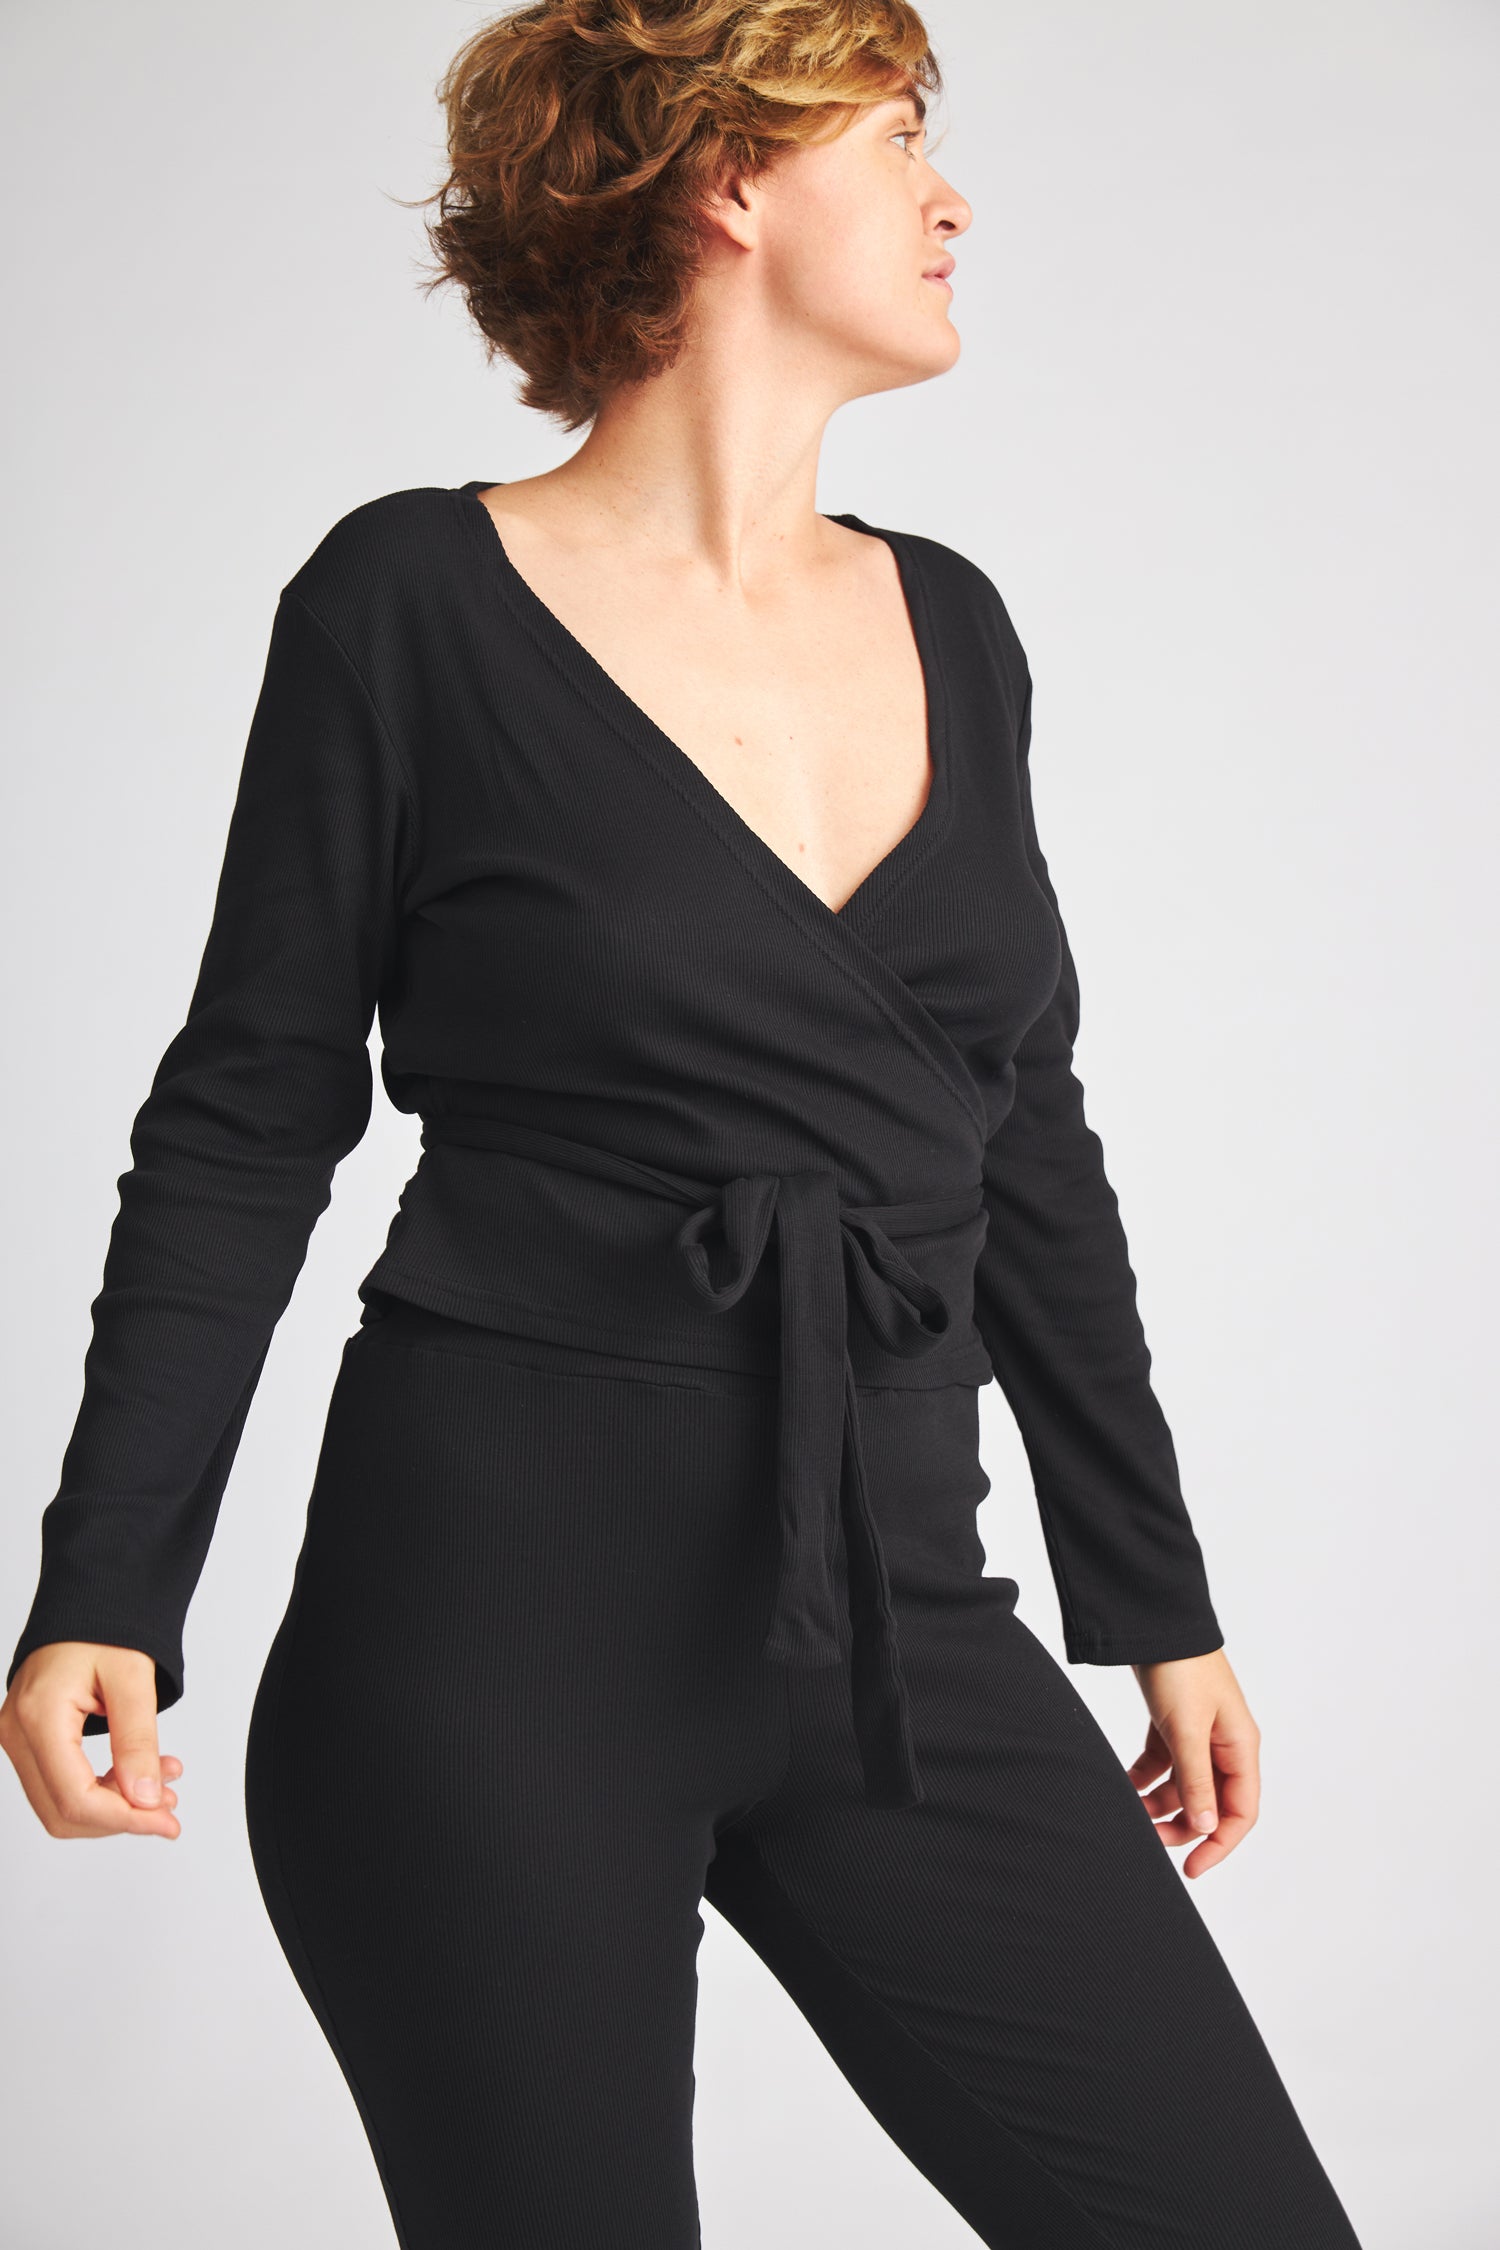 Black Bahar wrap shirt made of organic cotton from Baige the Label